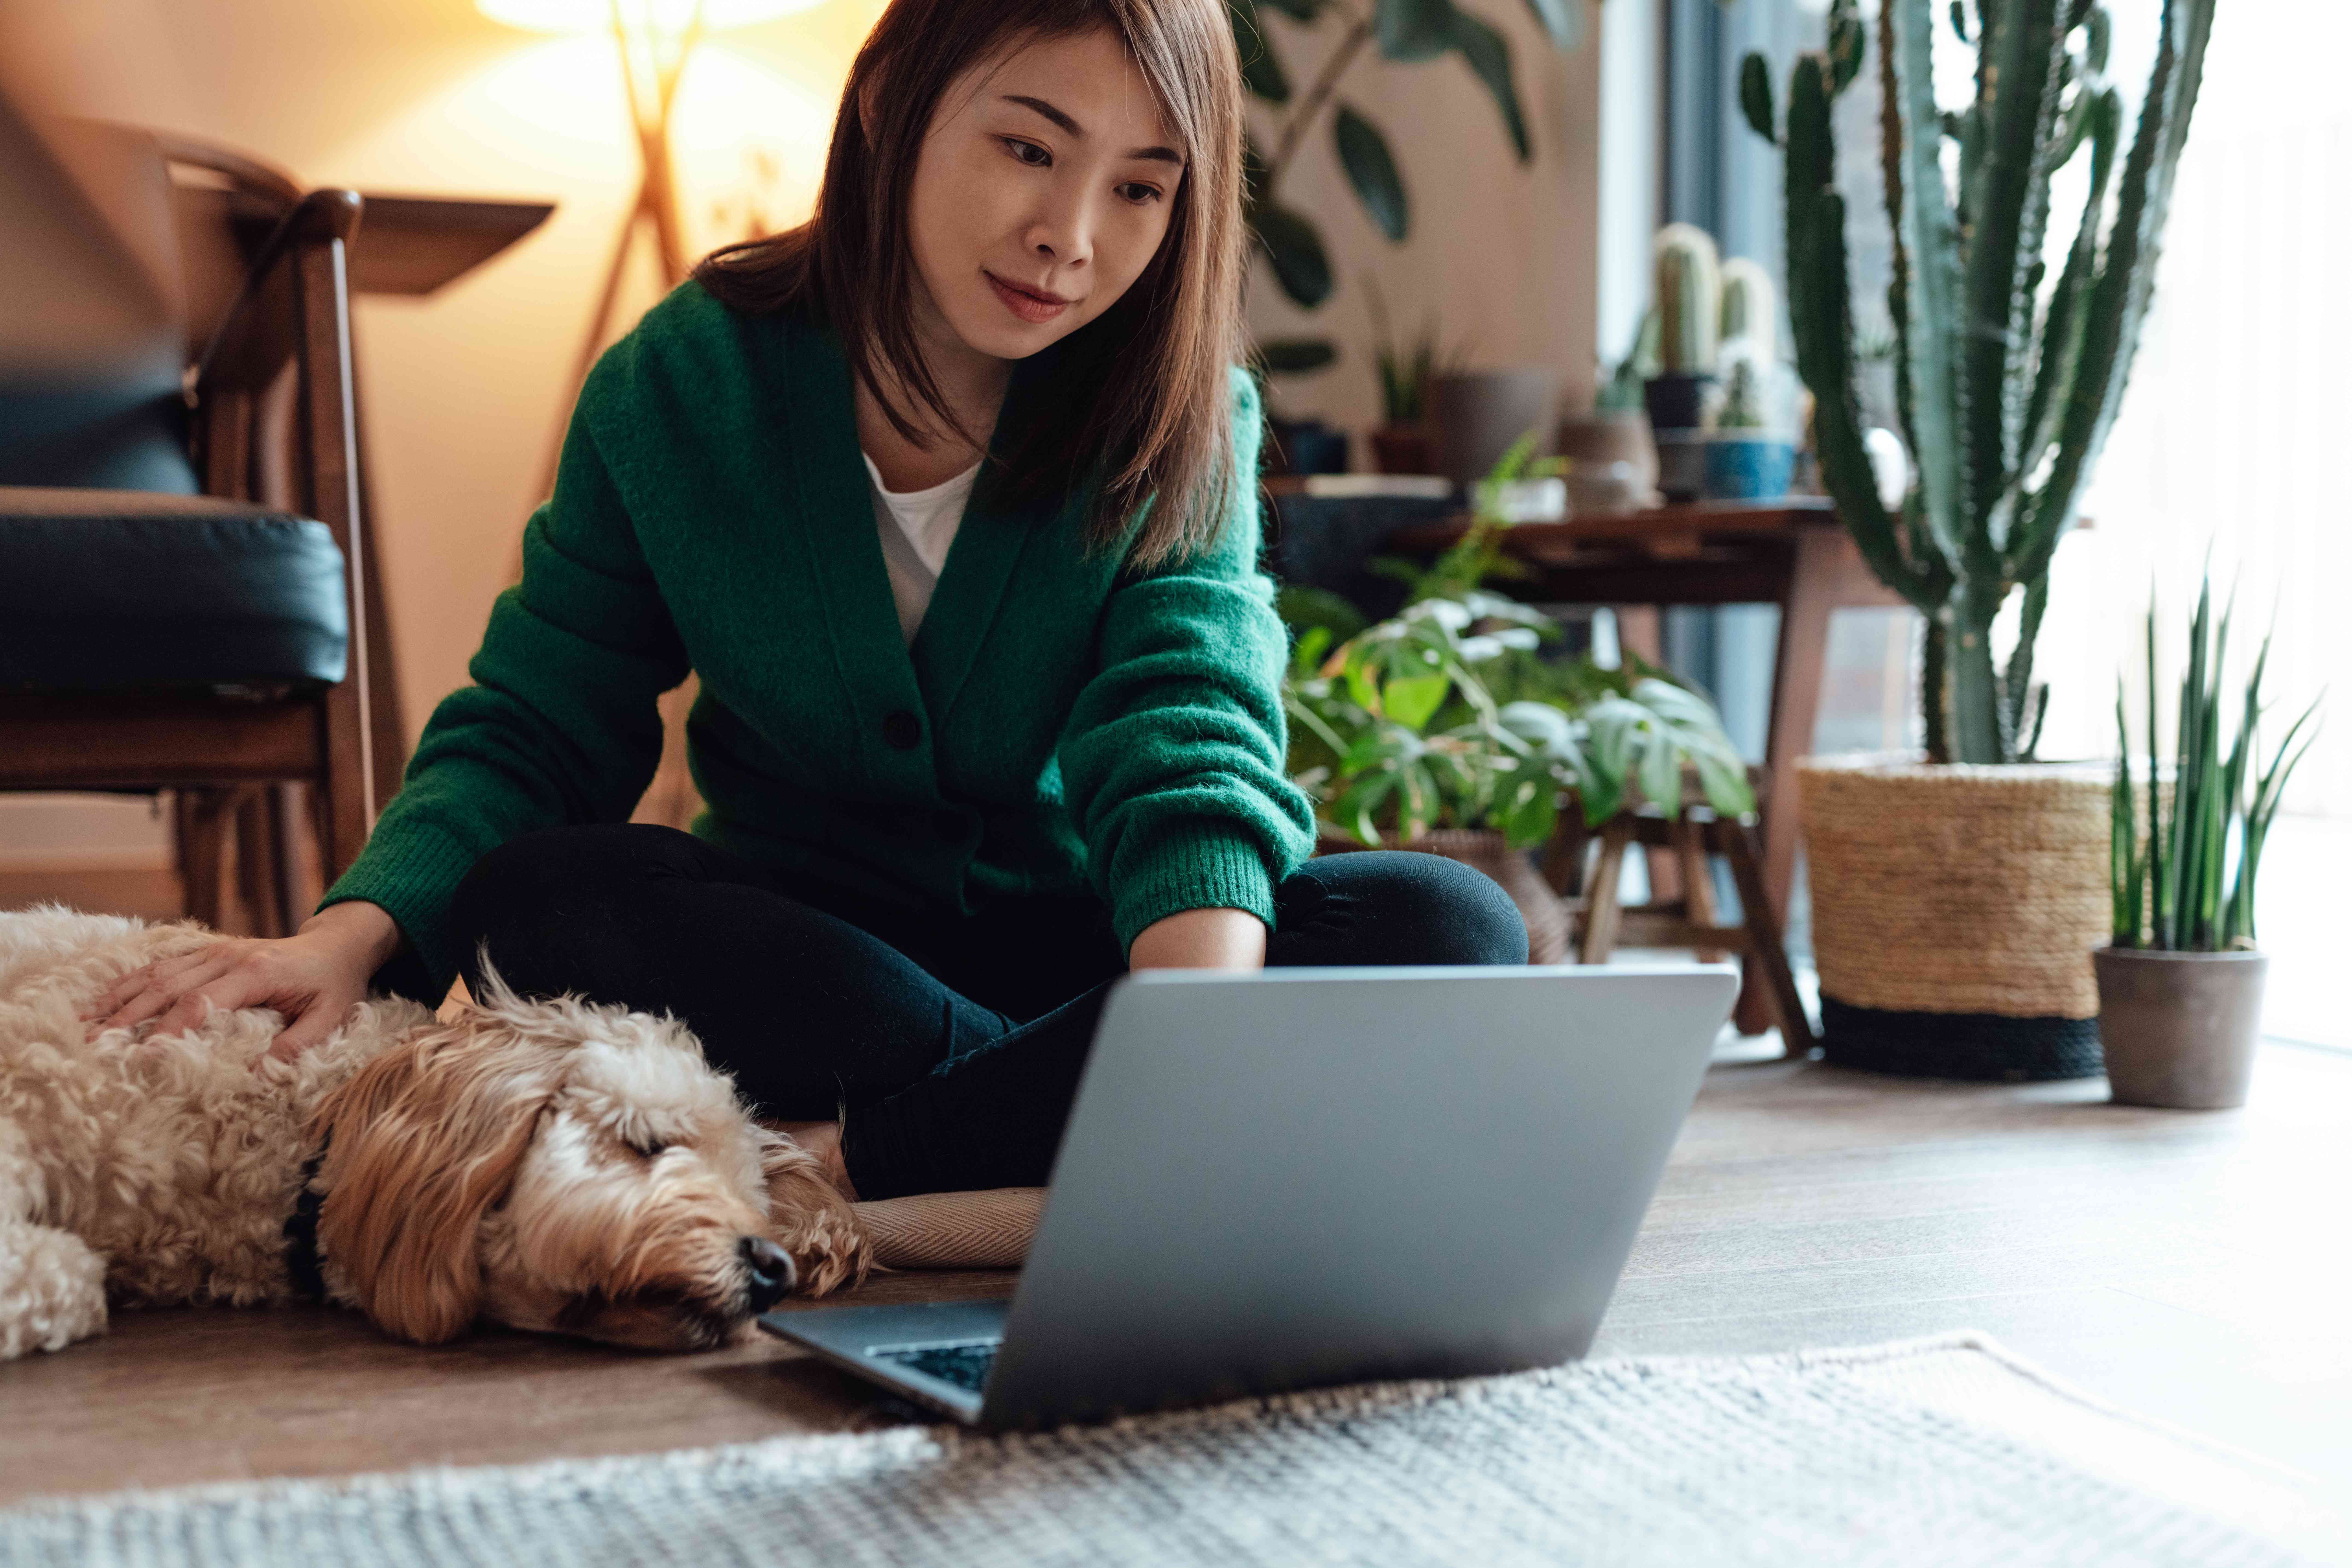 Woman patting a dog while using a laptop computer and seated on the floor.